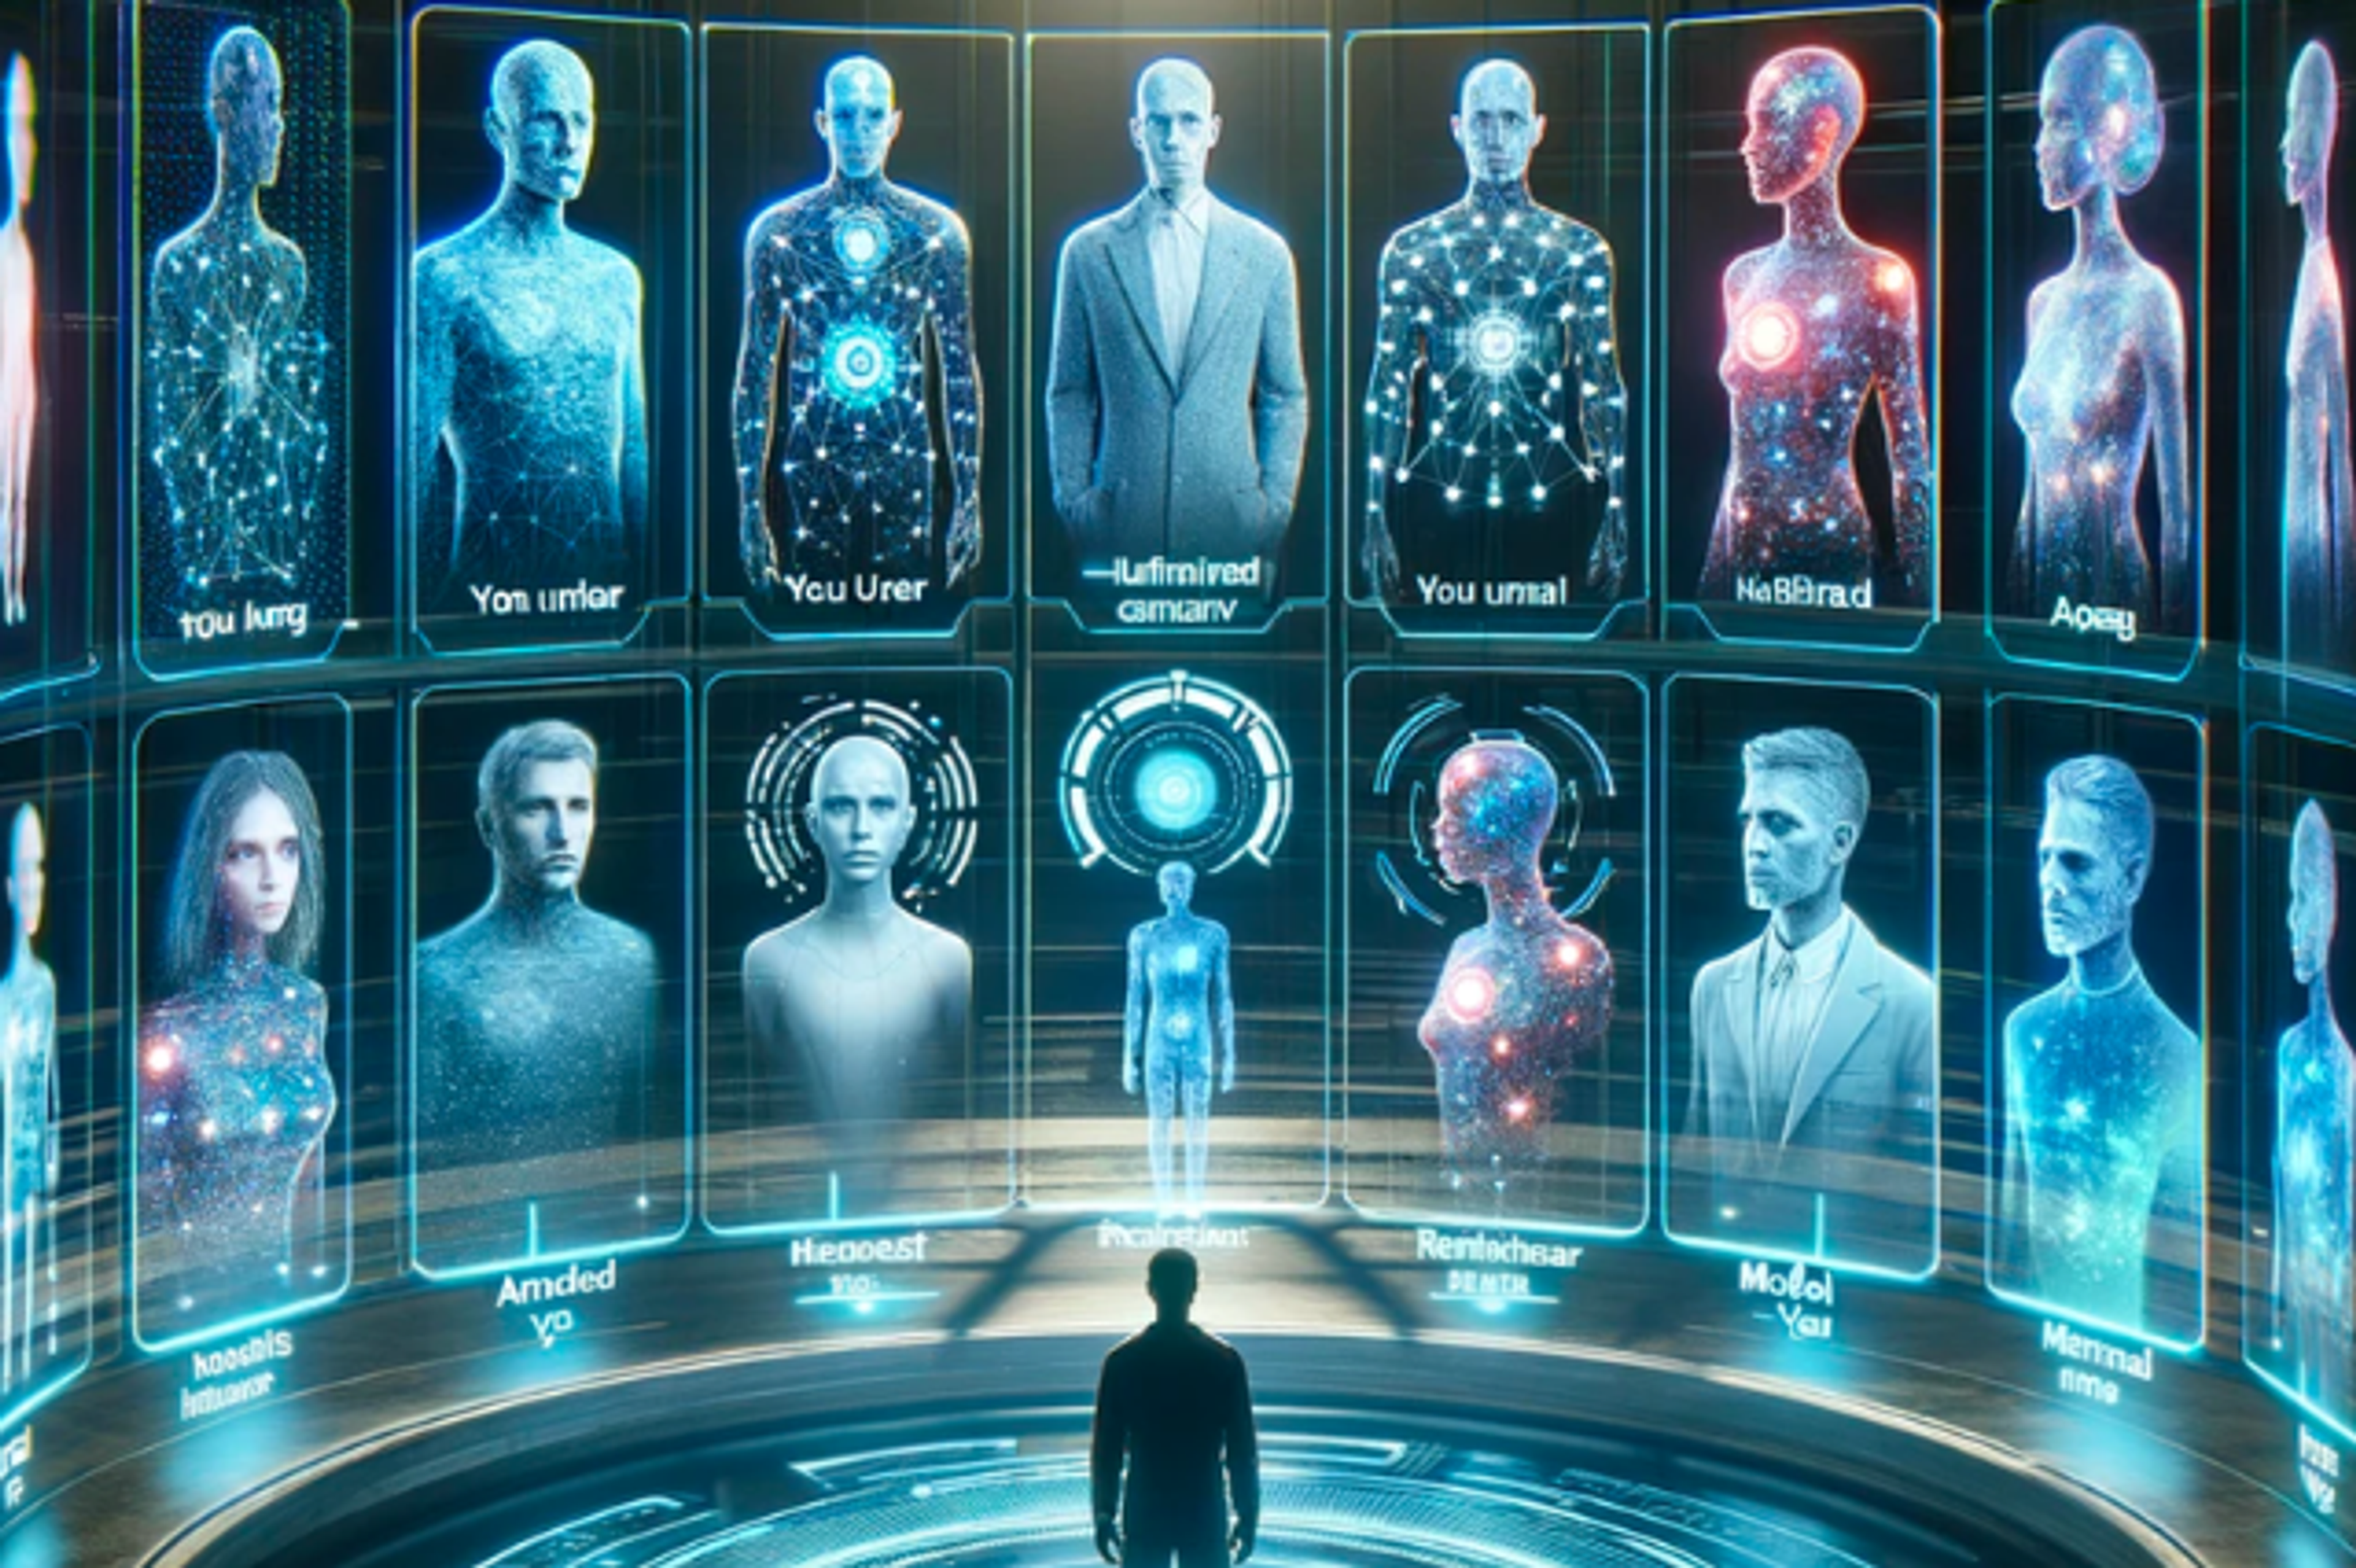 futuristic person interacting with "Council of You" digital replicants; image generated with AI